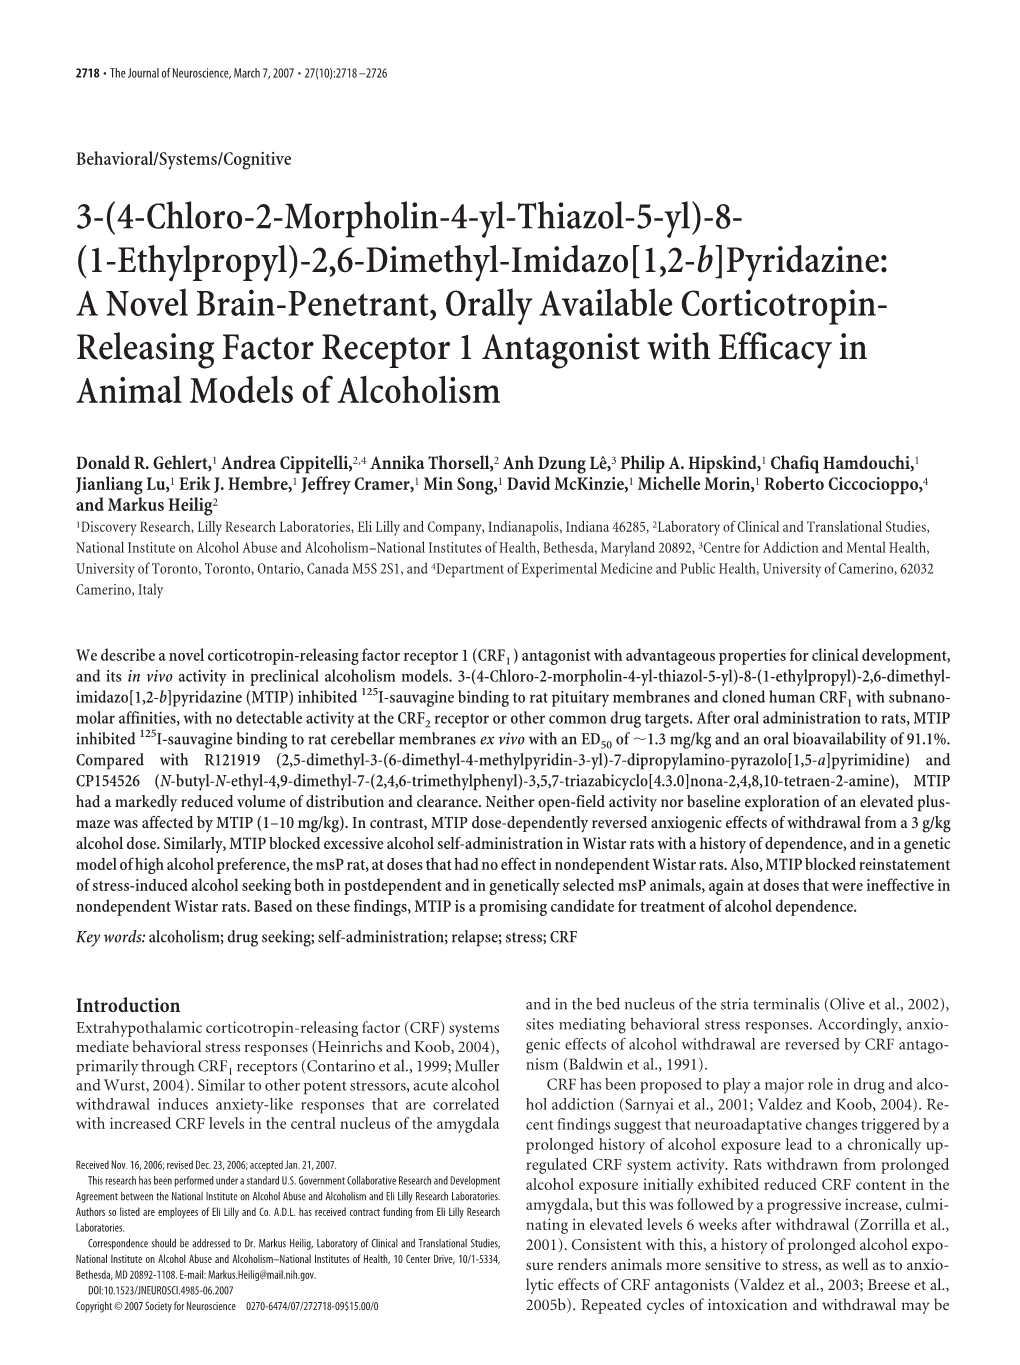 A Novel Brain-Penetrant, Orally Available Corticotropin- Releasing Factor Receptor 1 Antagonist with Efficacy in Animal Models of Alcoholism